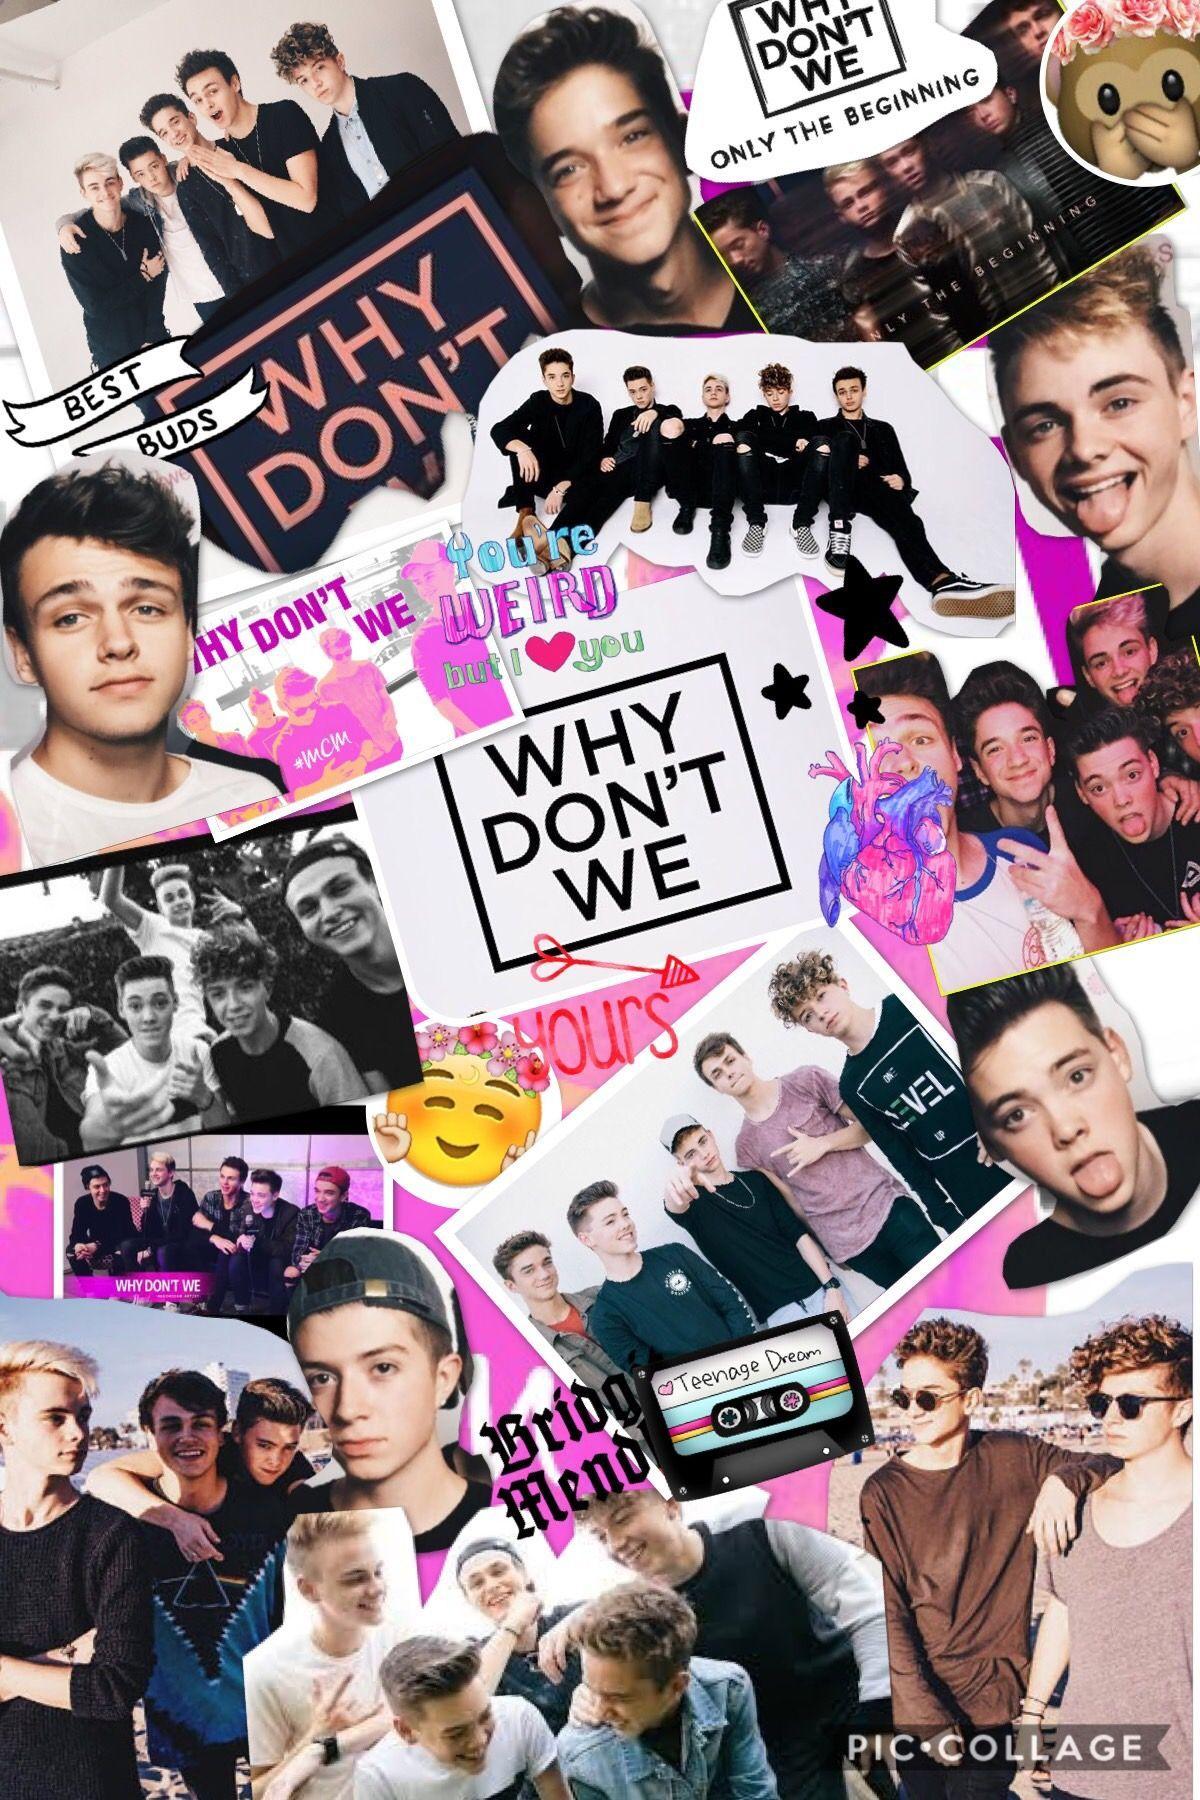 Why don't we band wallpaper. Why don't we band